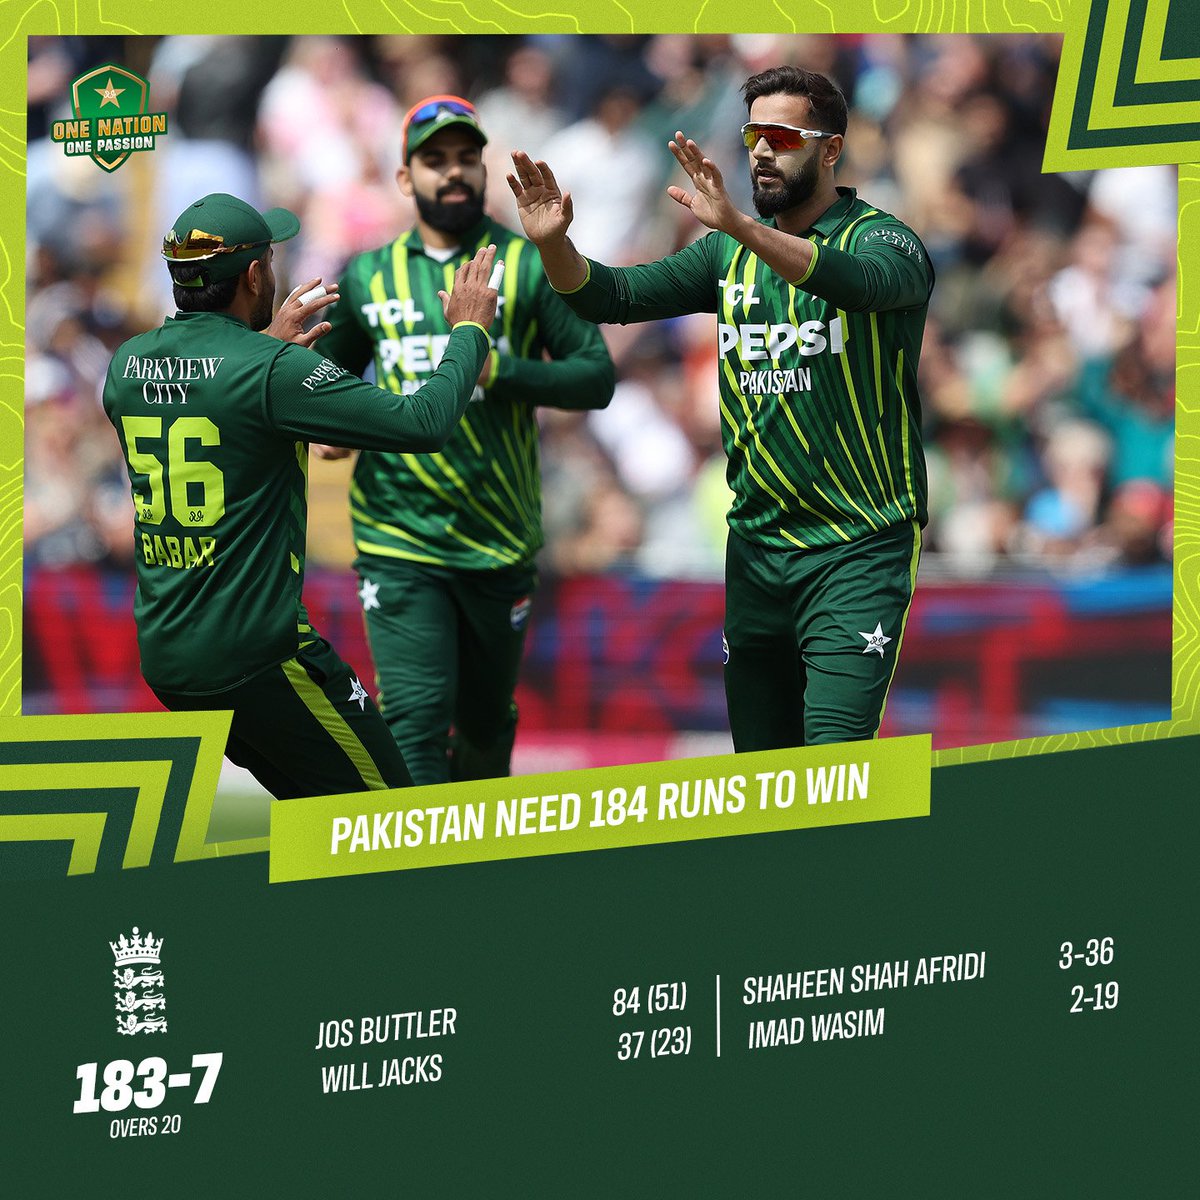 ICYMI: Wickets tumbled in the death overs as England set Pakistan a target of 184 🏏 #ENGvPAK | #BackTheBoysInGreen